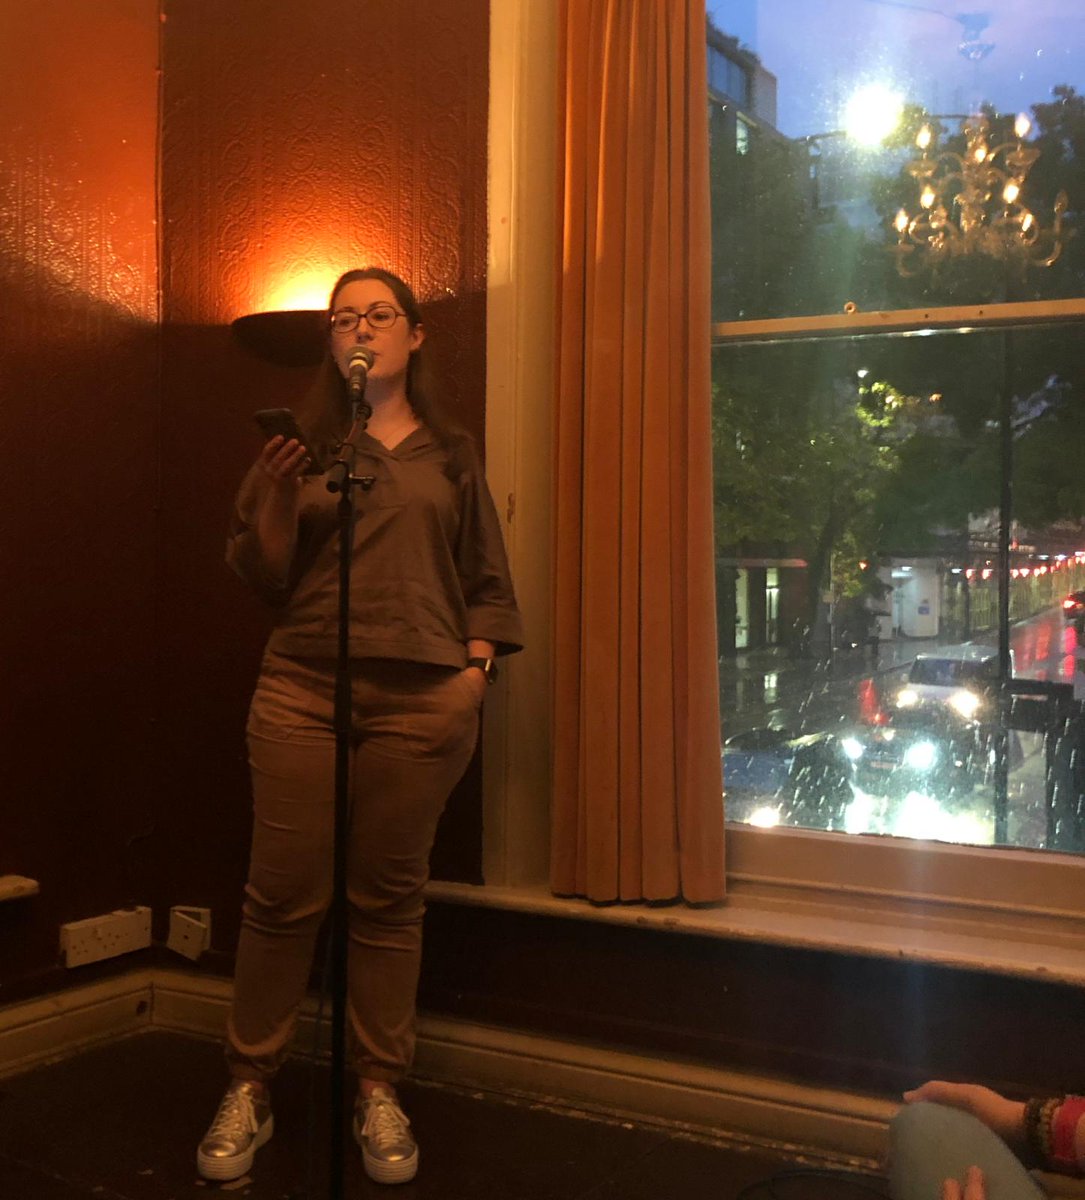 Had a wonderful autumnal evening tonight with some incredible poets. Thank you so much for organising @_WendyCaitlin @theeabsentee @AngelaCleland #London #HomeHome photo @ChristinaCarty_